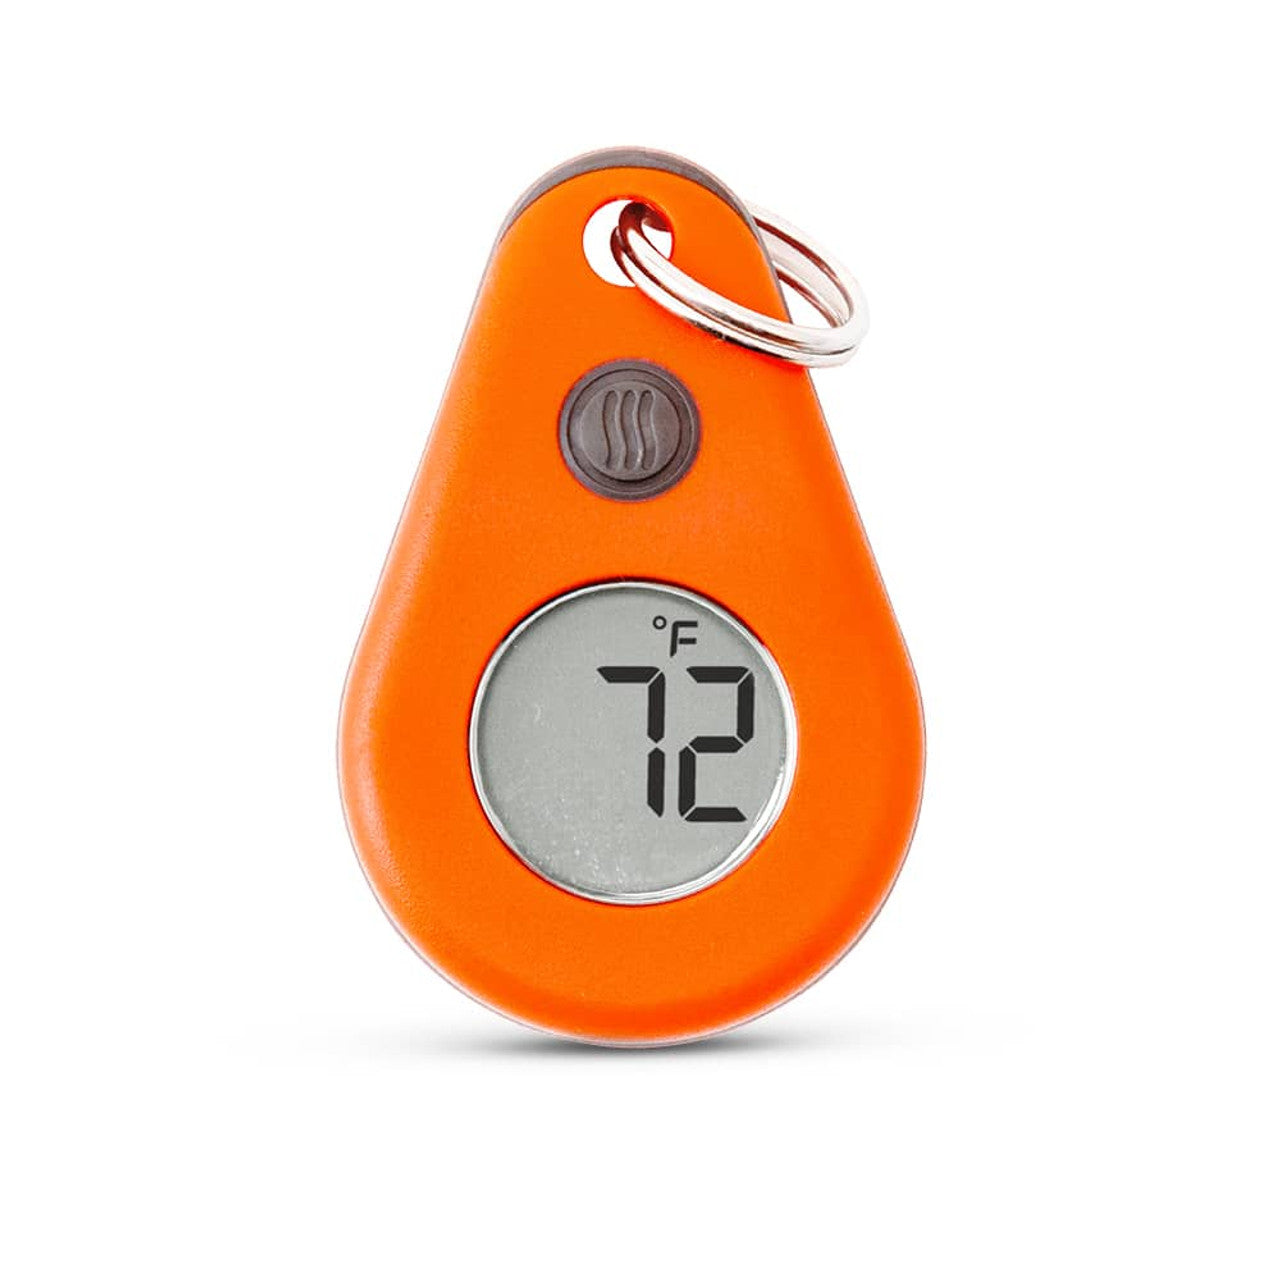 Thermometer by ThermoWorks